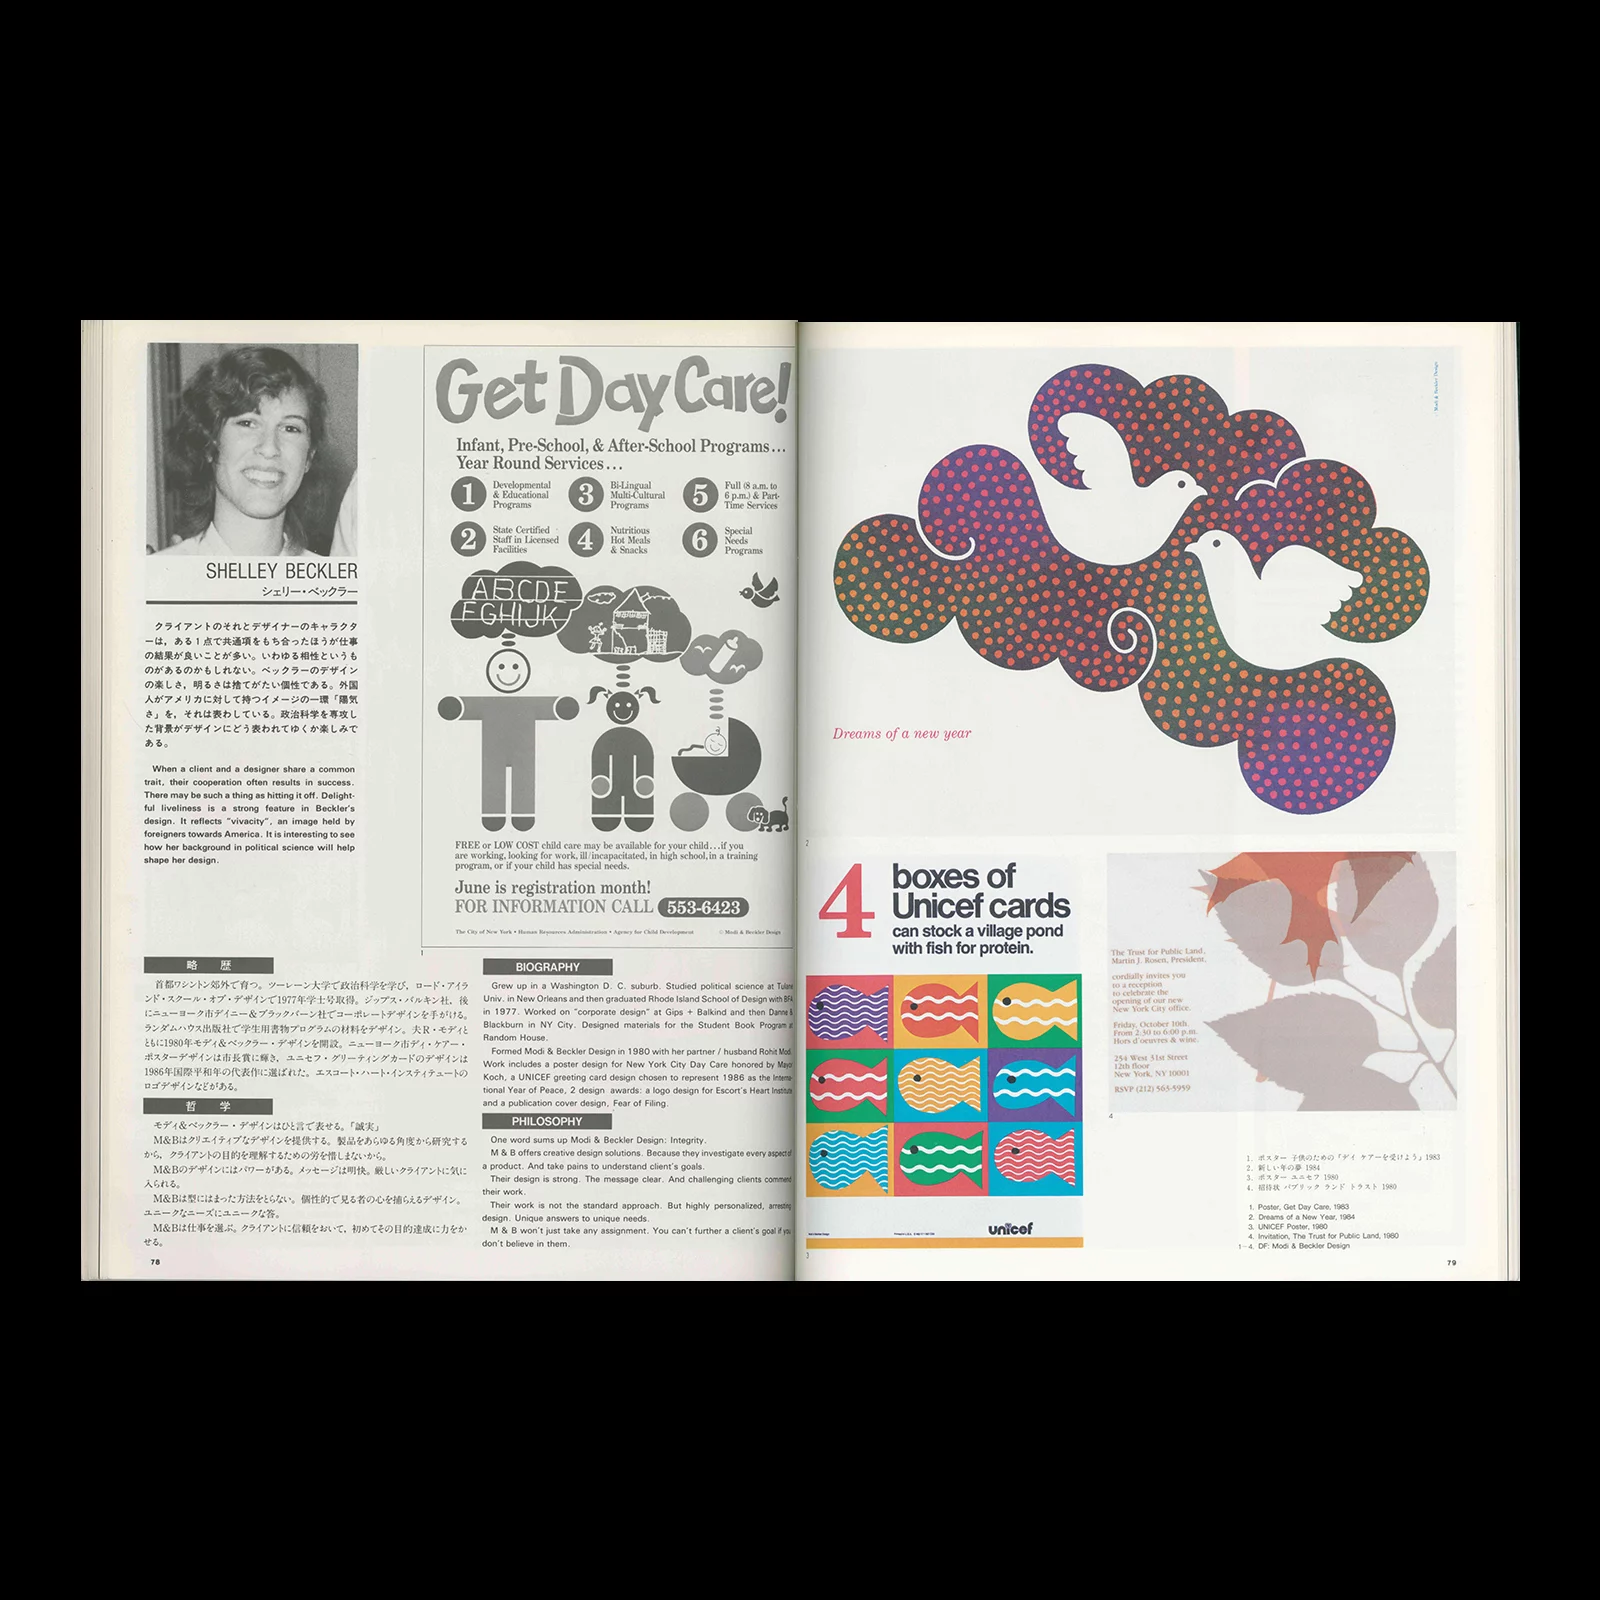 IDEA Extra Issue - Women Designers of America, 1988 - Shelley Beckler